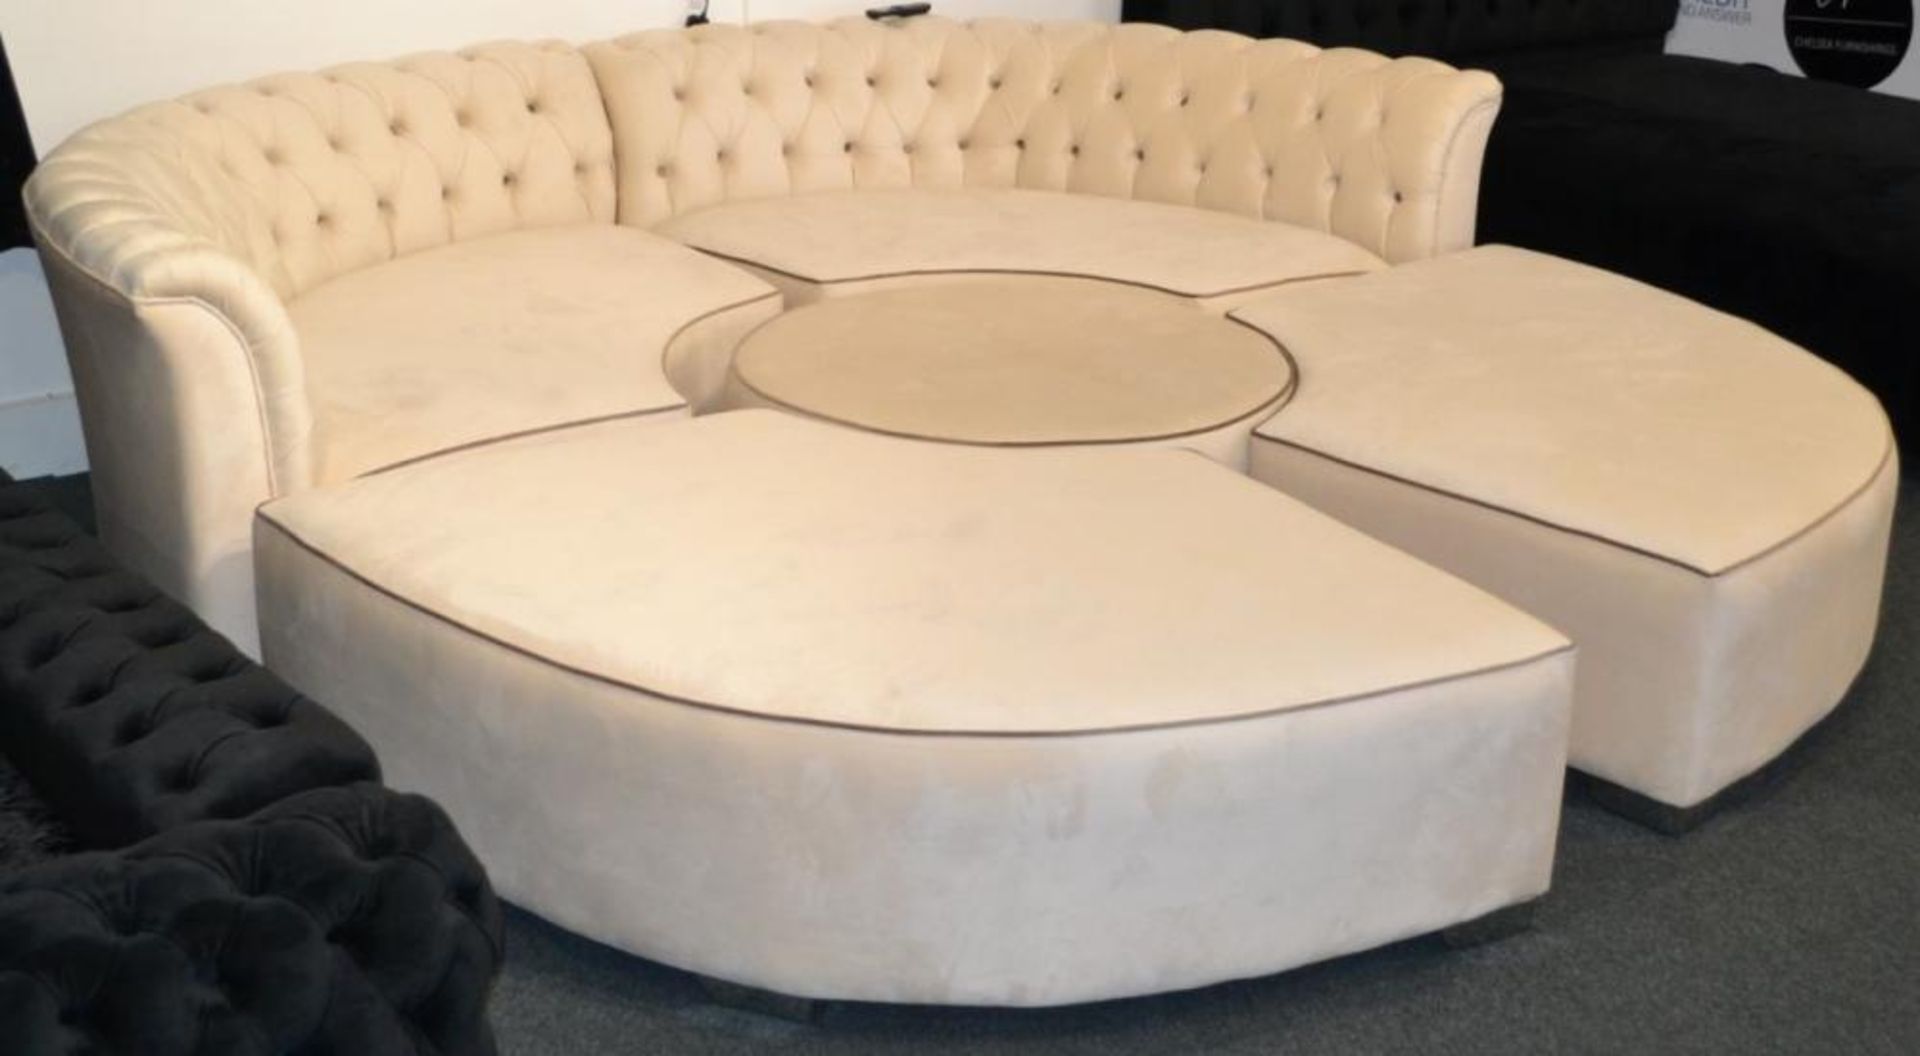 1 x Luxurious Bespoke Cream Velour 5 Piece Sofa Set. A truly beautiful bespoke piece that will give - Image 2 of 8